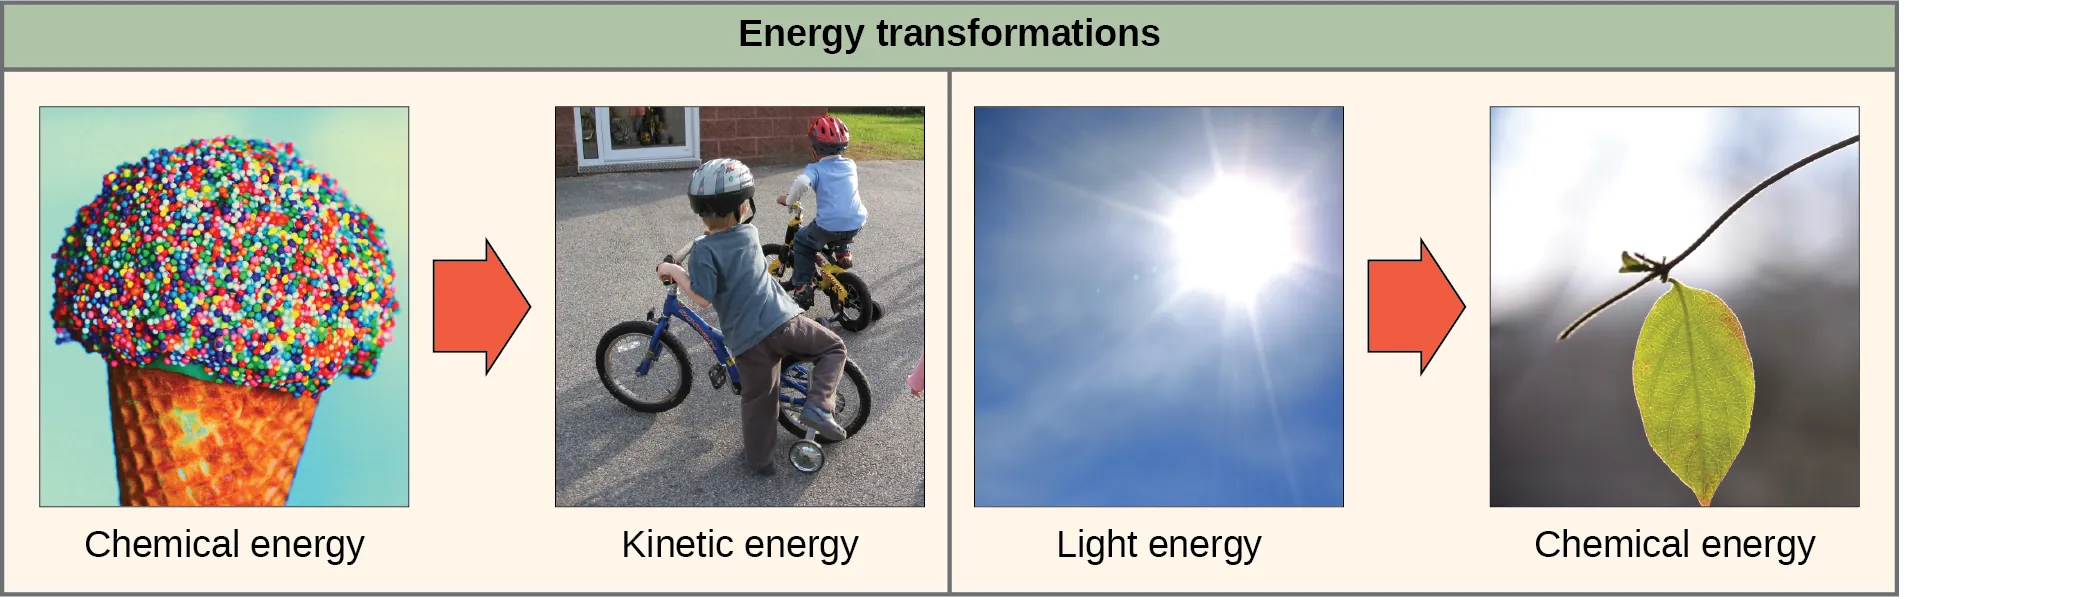 The left side of this diagram depicts energy being transferred from an ice cream cone to two boys riding a bike; this is described as chemical energy to kinetic energy. The right side depicts a plant converting light energy into chemical energy.